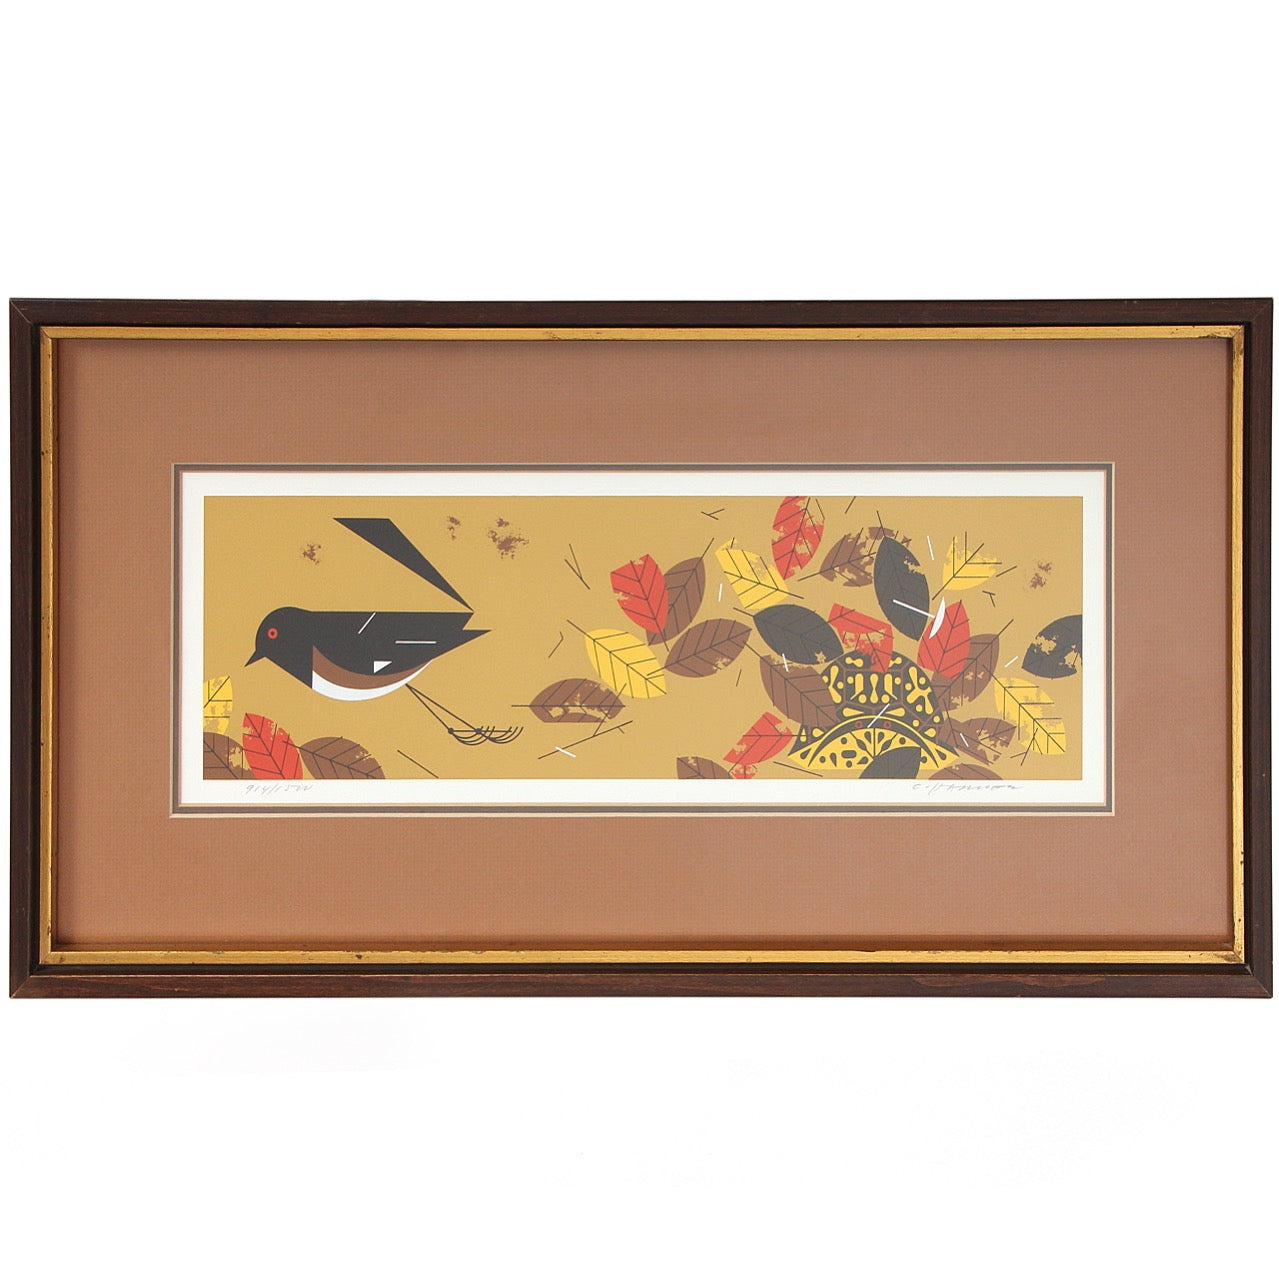 Limited Edition Serigraph of Bird with Fall Leaves by Charley Harper